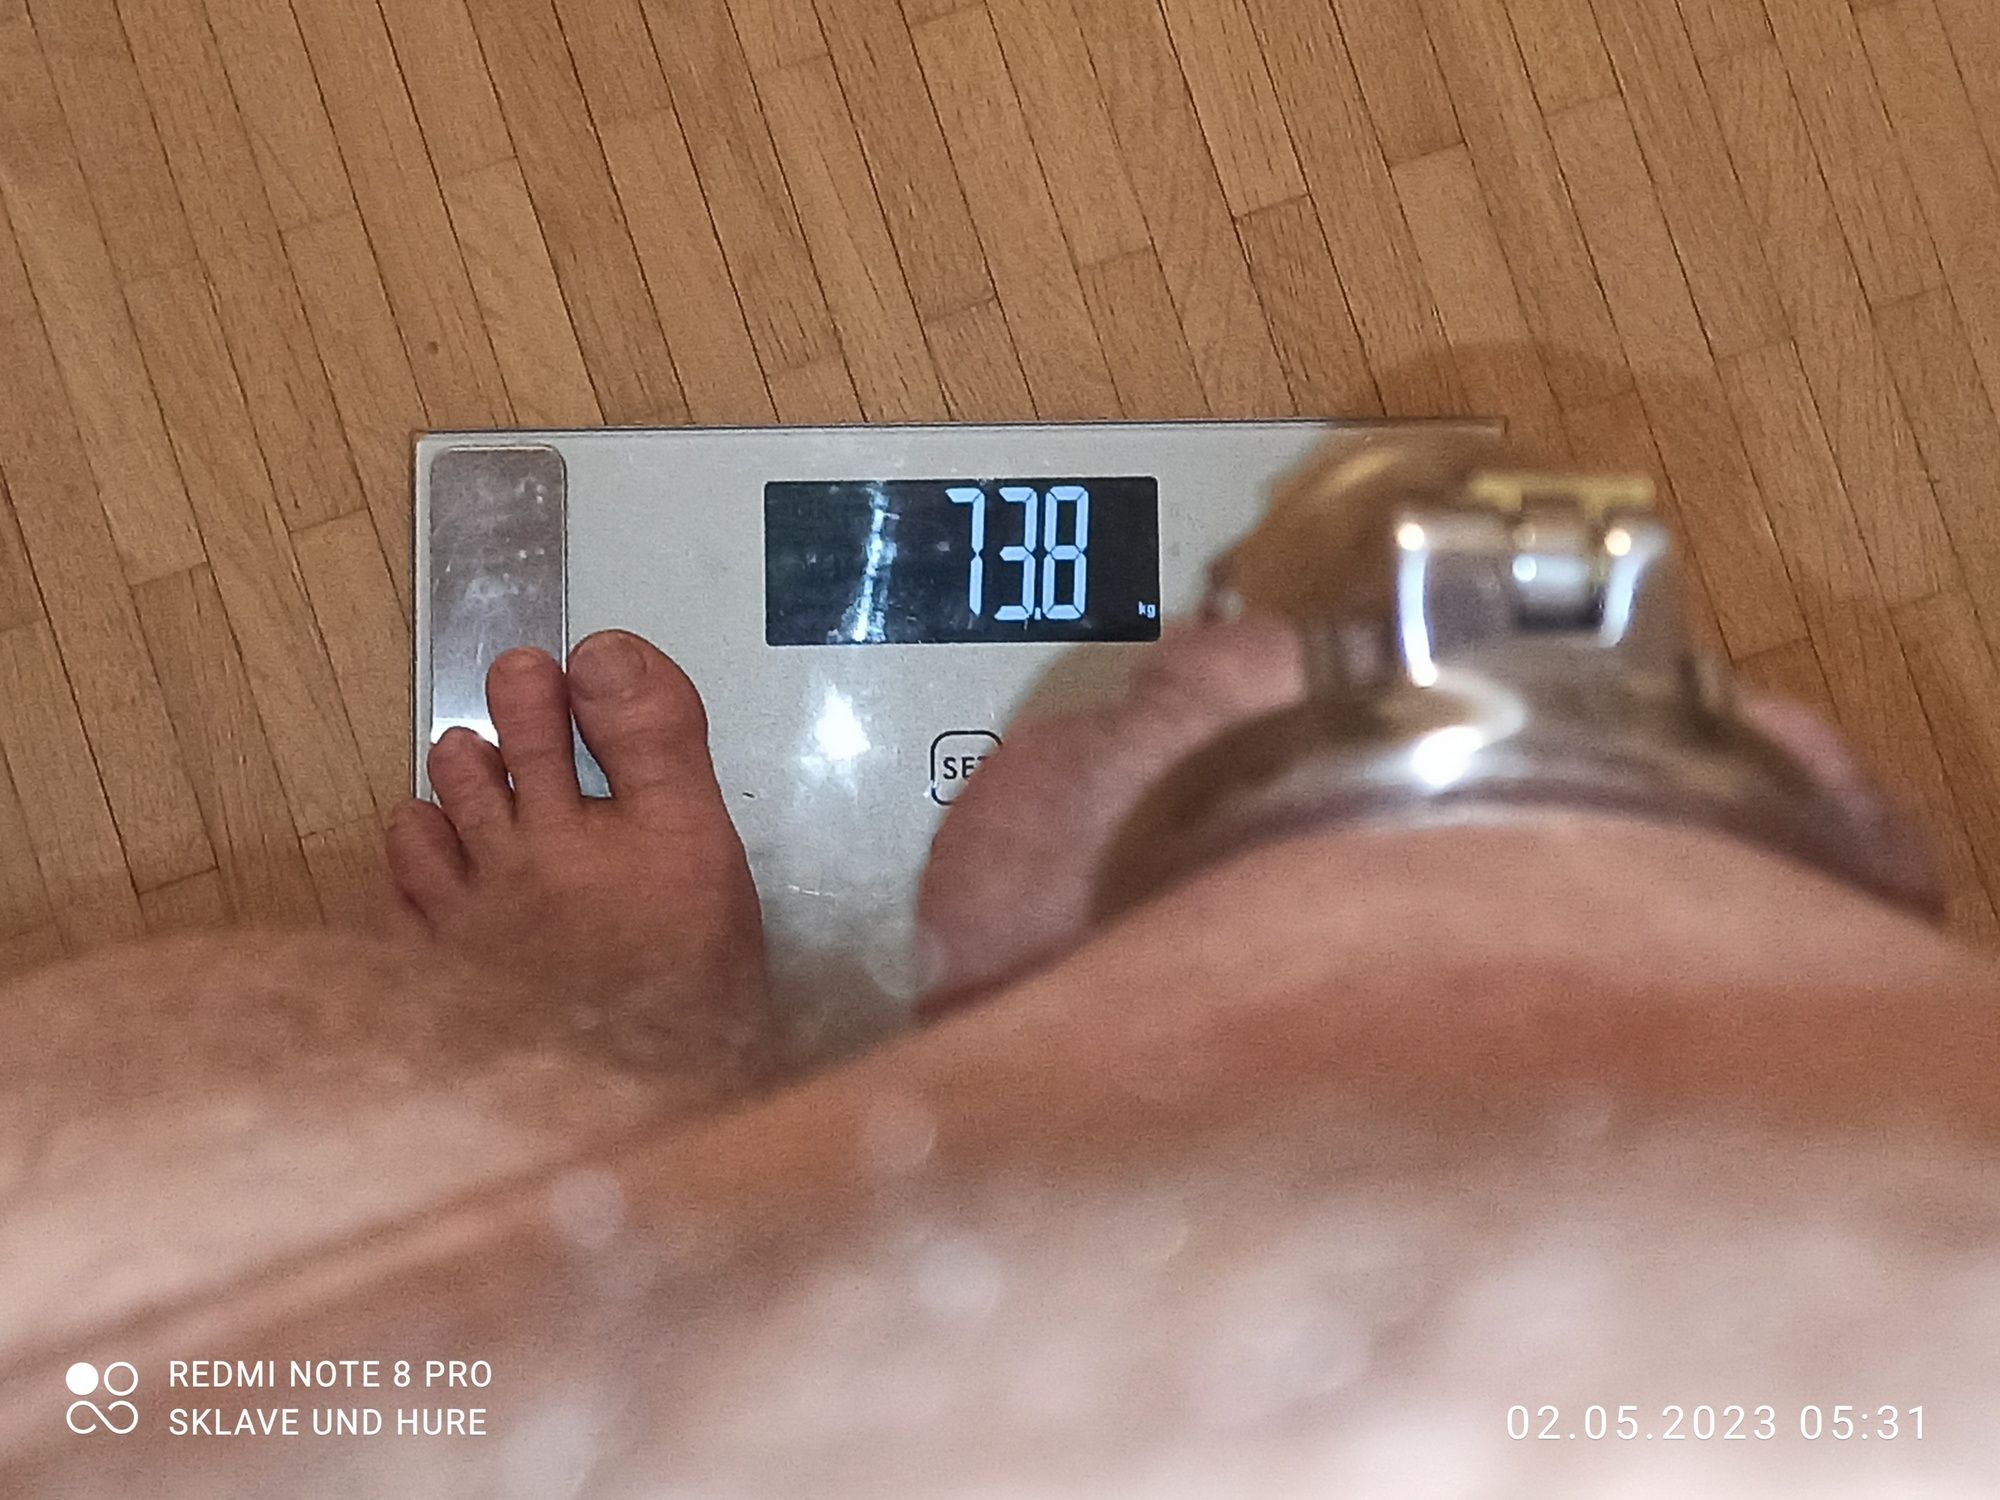 Disobedient slave after weighing, cagecheck 02.05.2023 #19